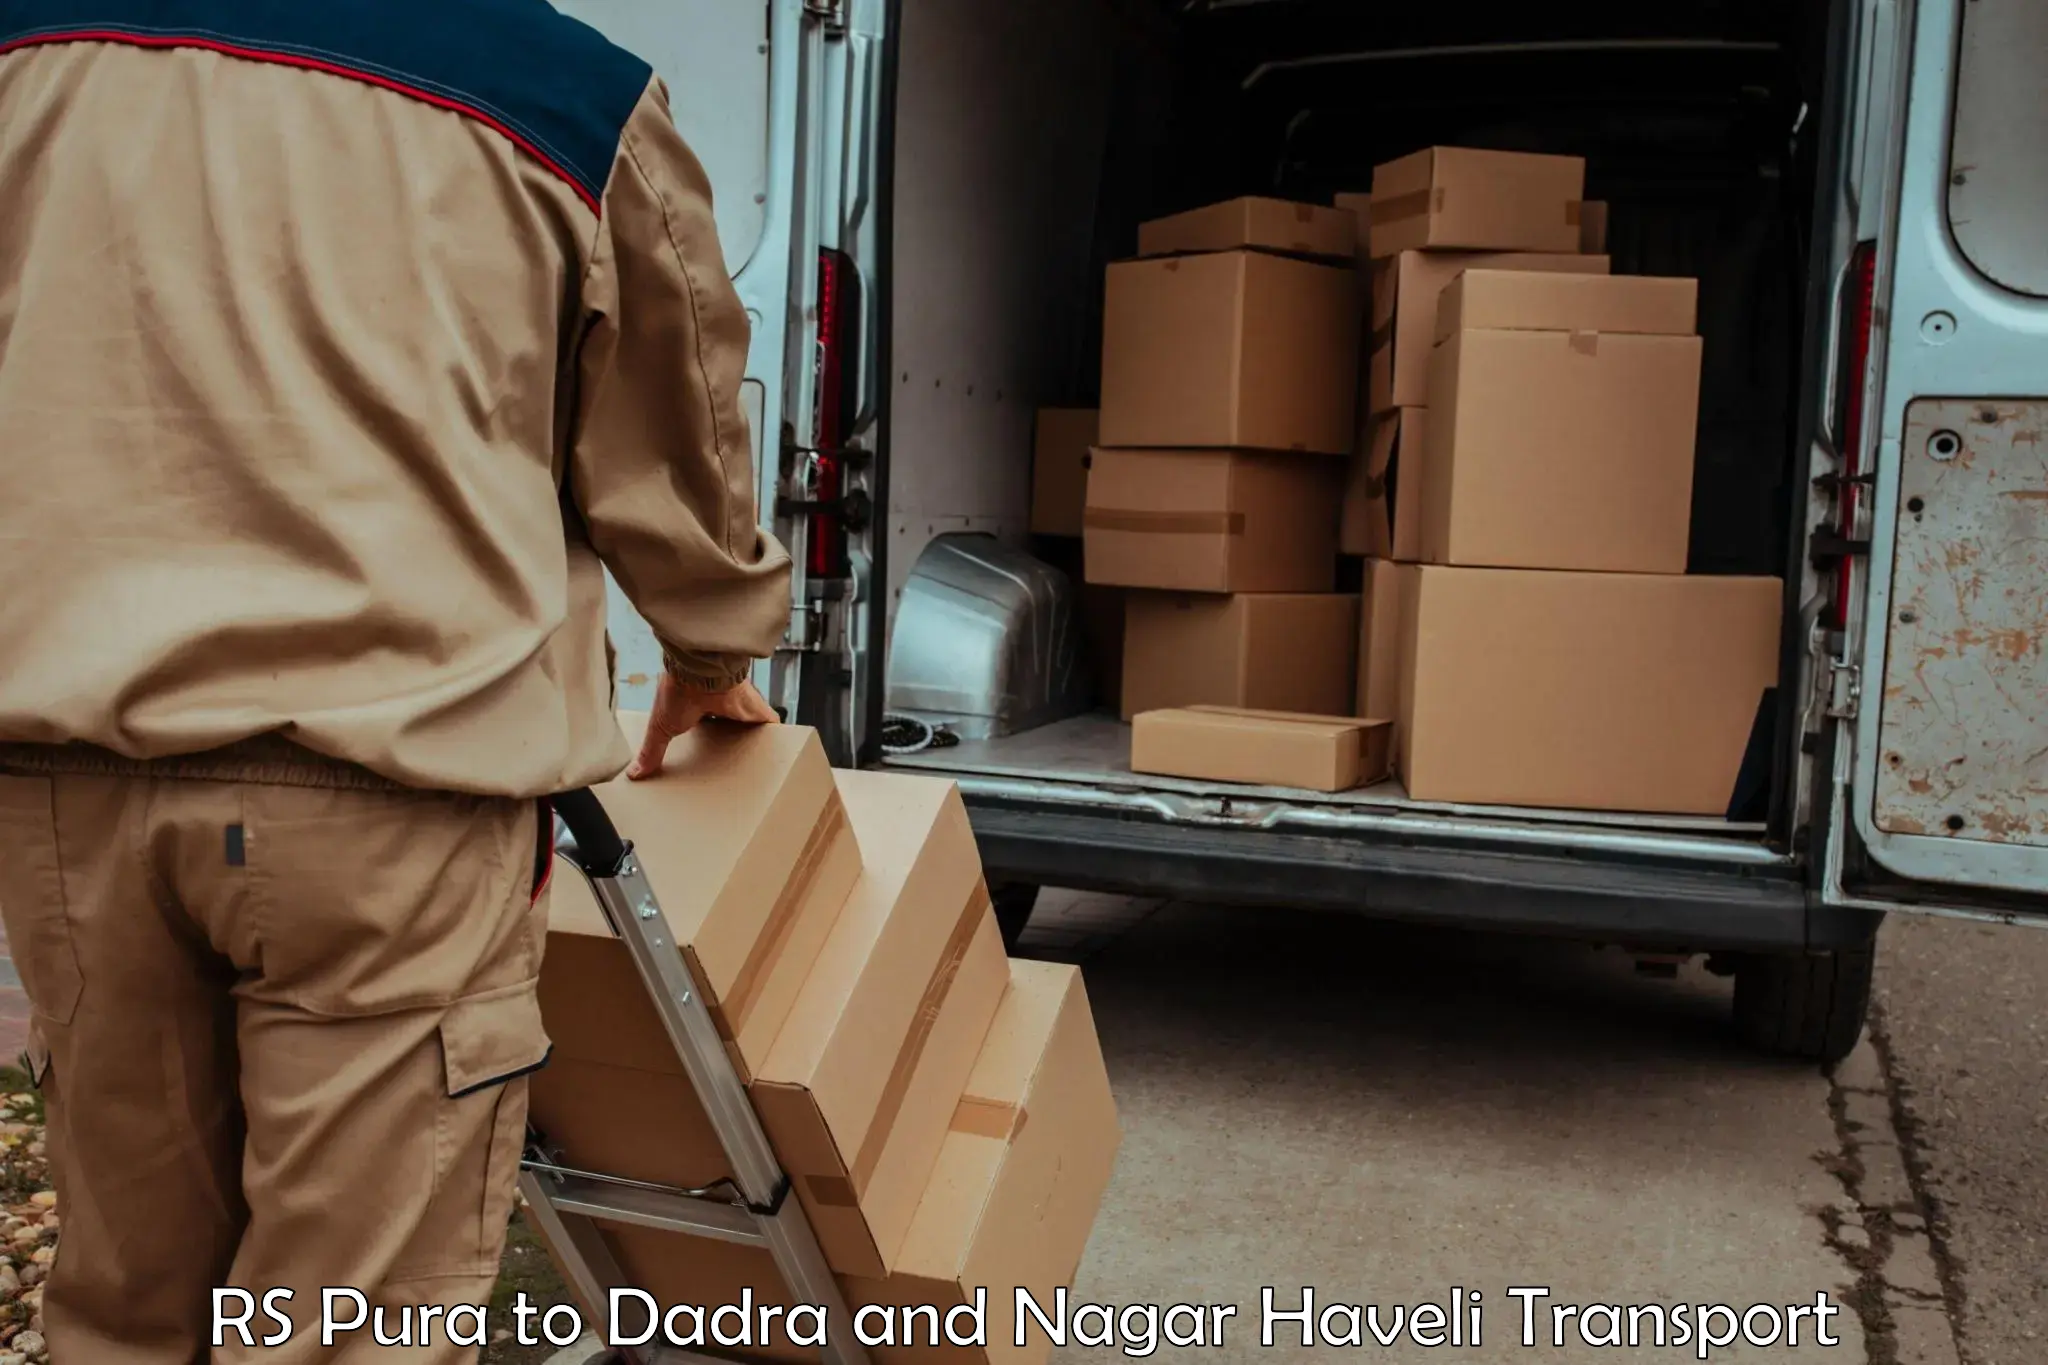 Nationwide transport services RS Pura to Dadra and Nagar Haveli